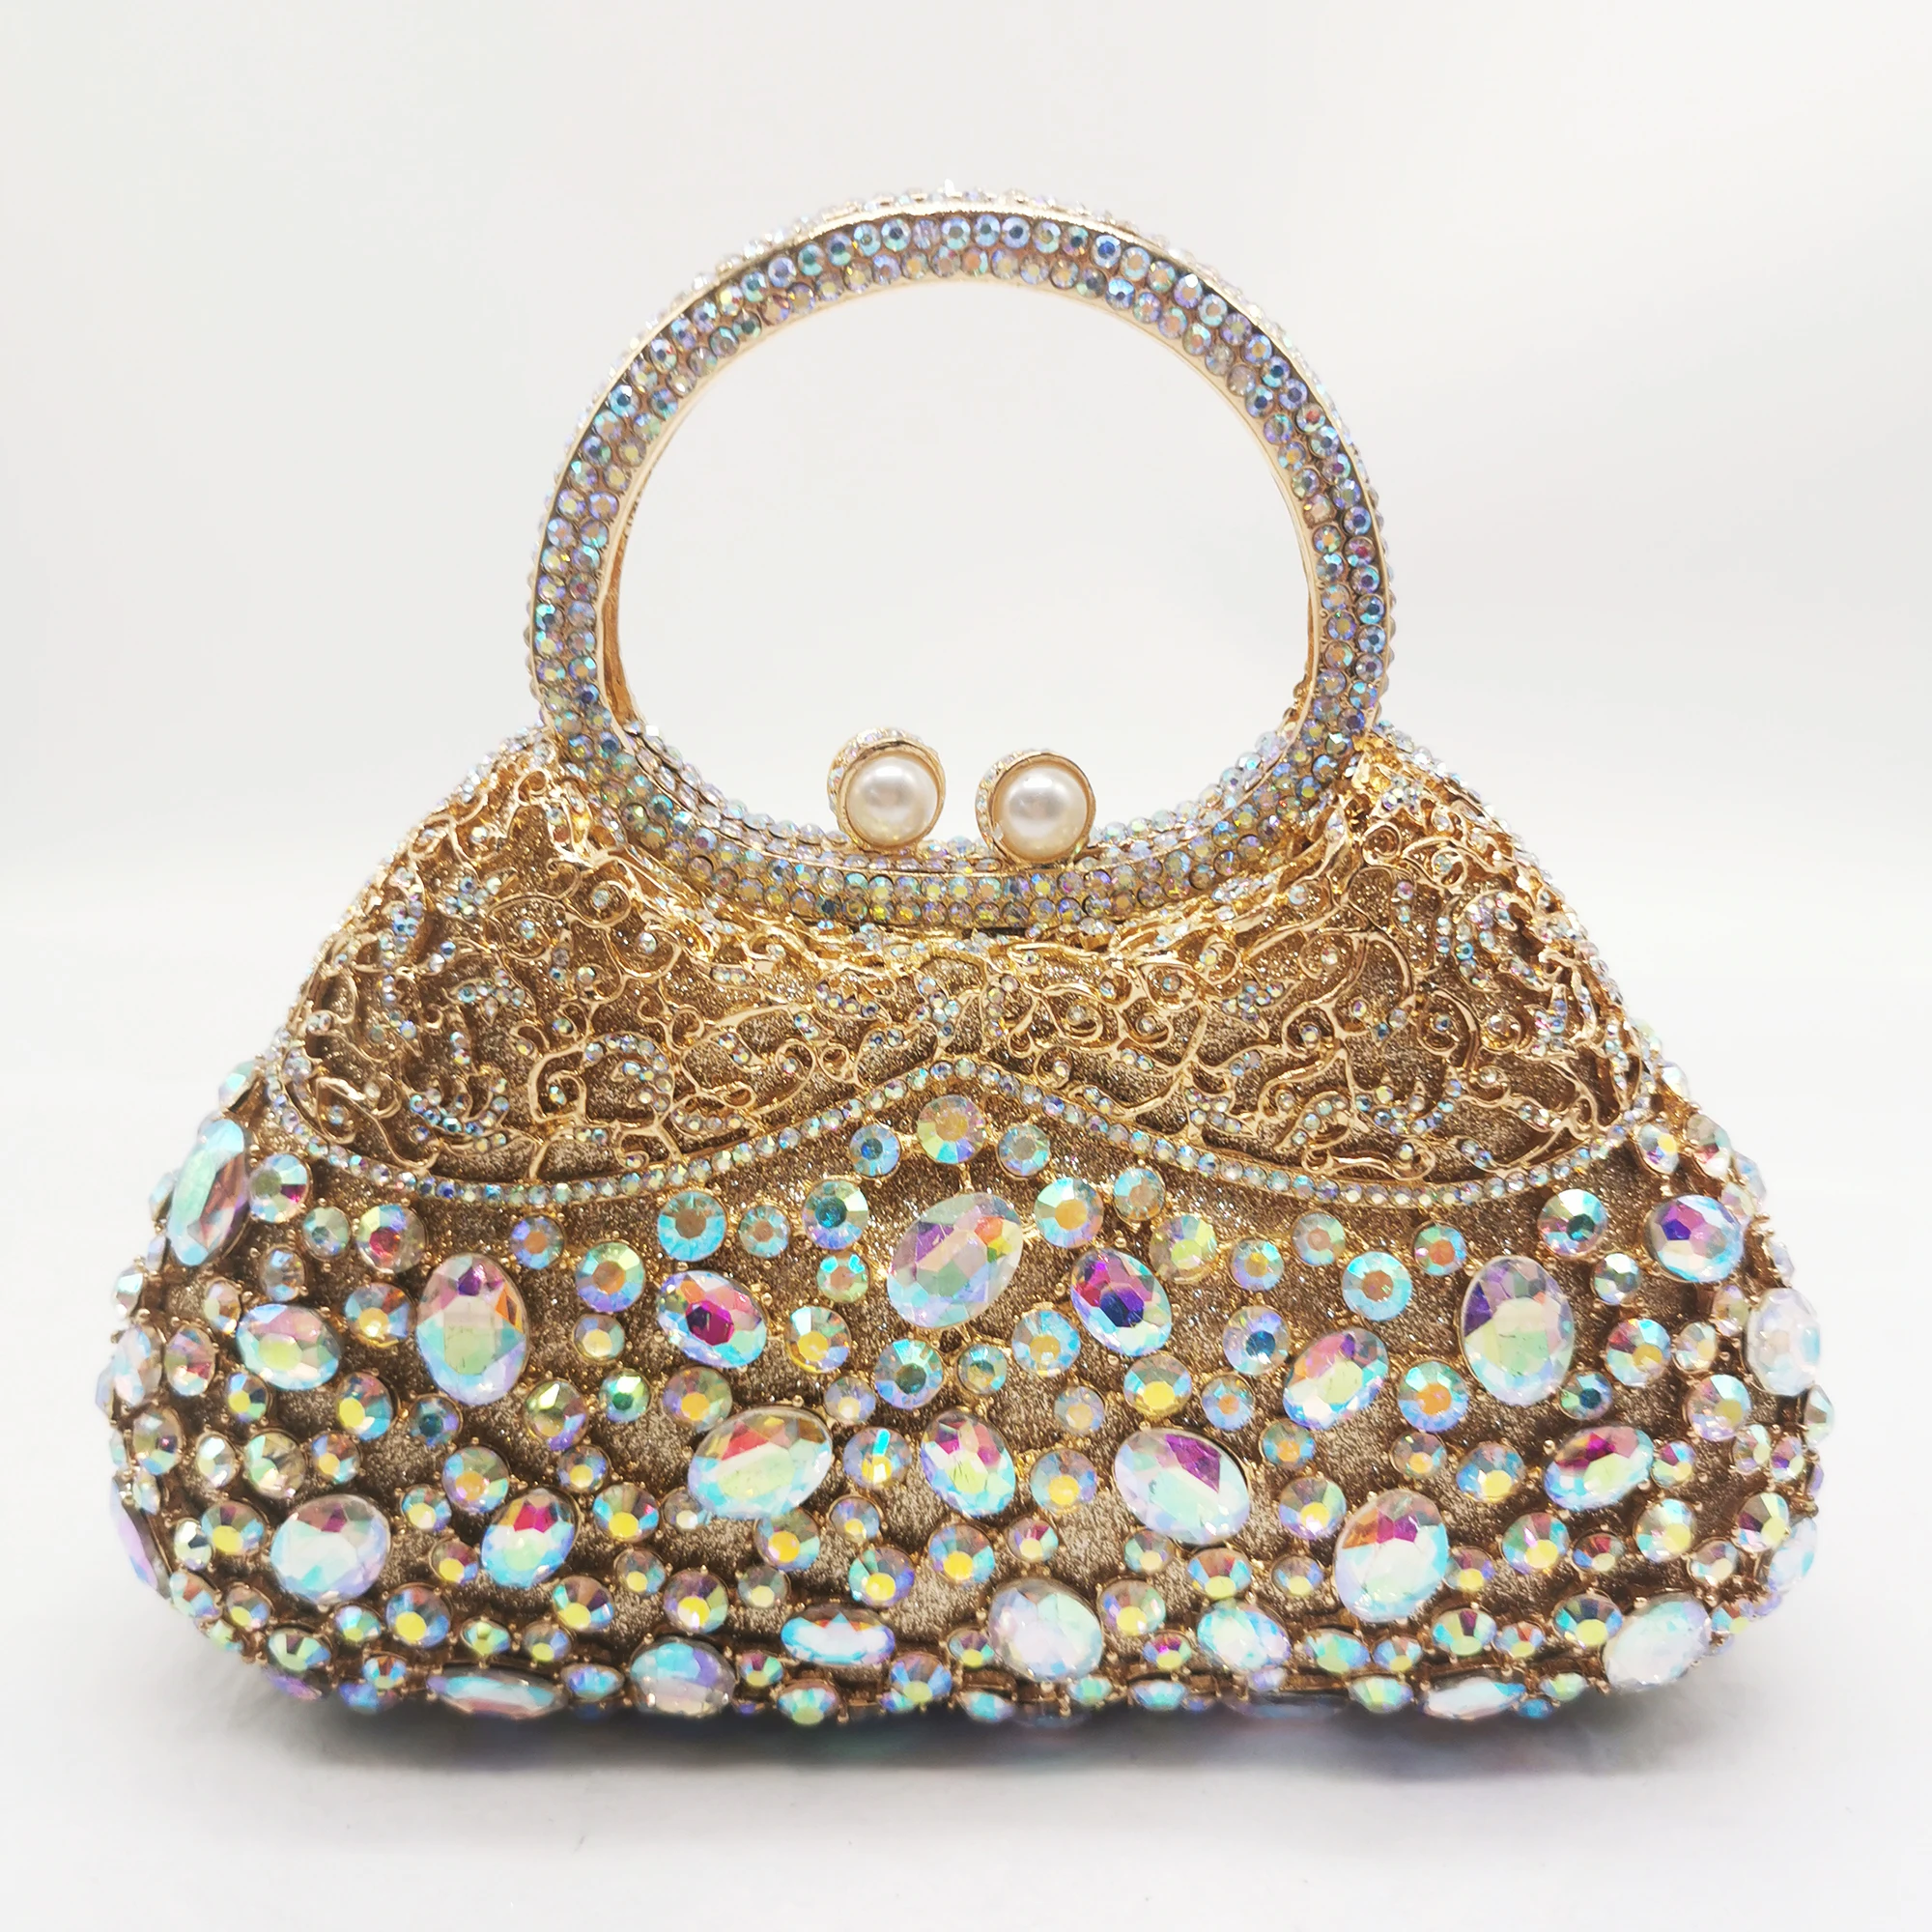 Latest Bridal Purses To Match Your Wedding Outfits | Bridal purse, Bridal  bag, Wedding outfit